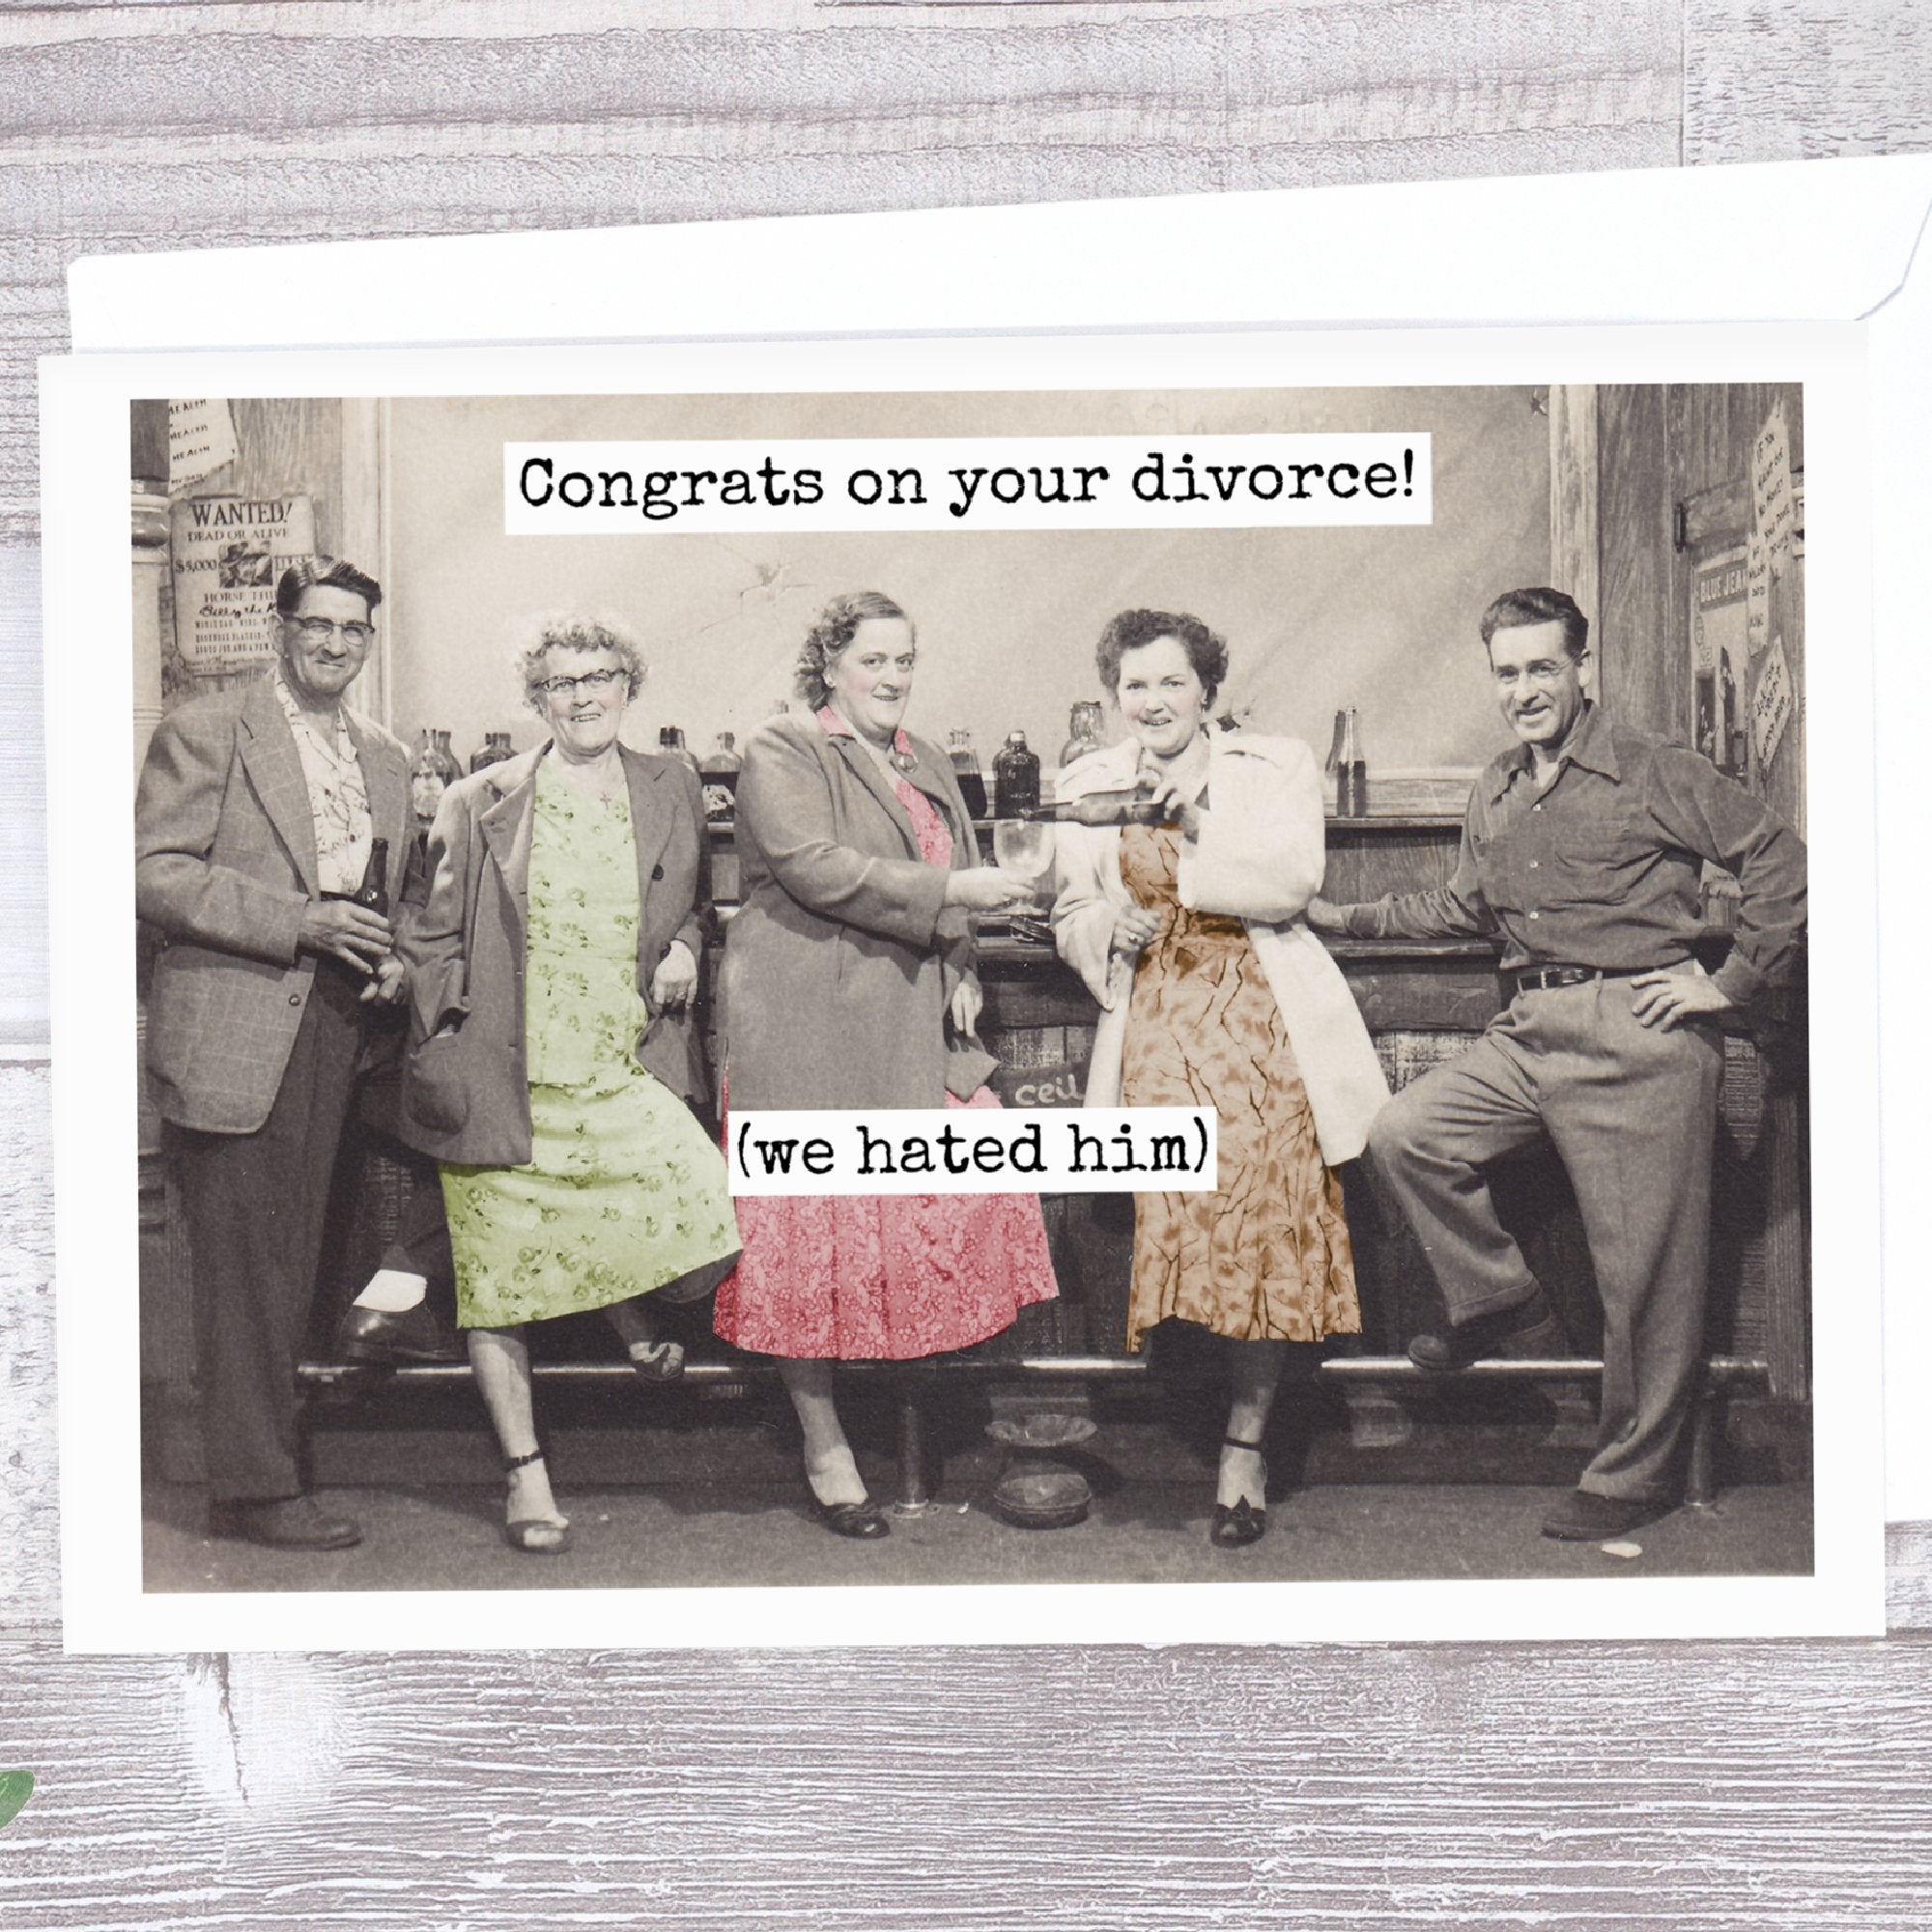 Congrats On Your Divorce! (We Hated Him). Greeting Card. - My Filosophy